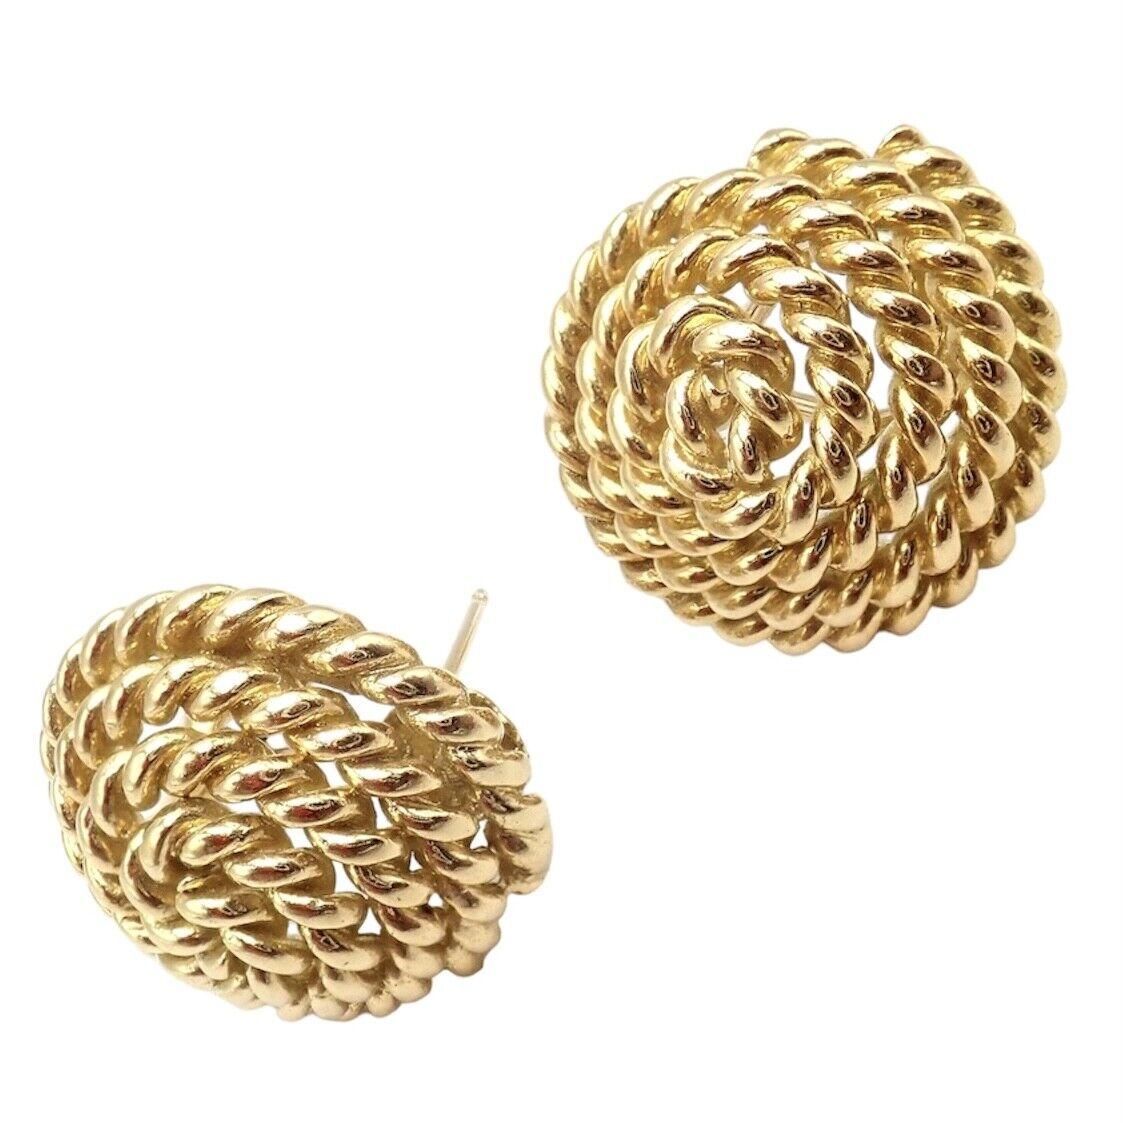 Vintage Tiffany & Co Large Coiled Rope Yellow Gold Earrings In Excellent Condition For Sale In Holland, PA